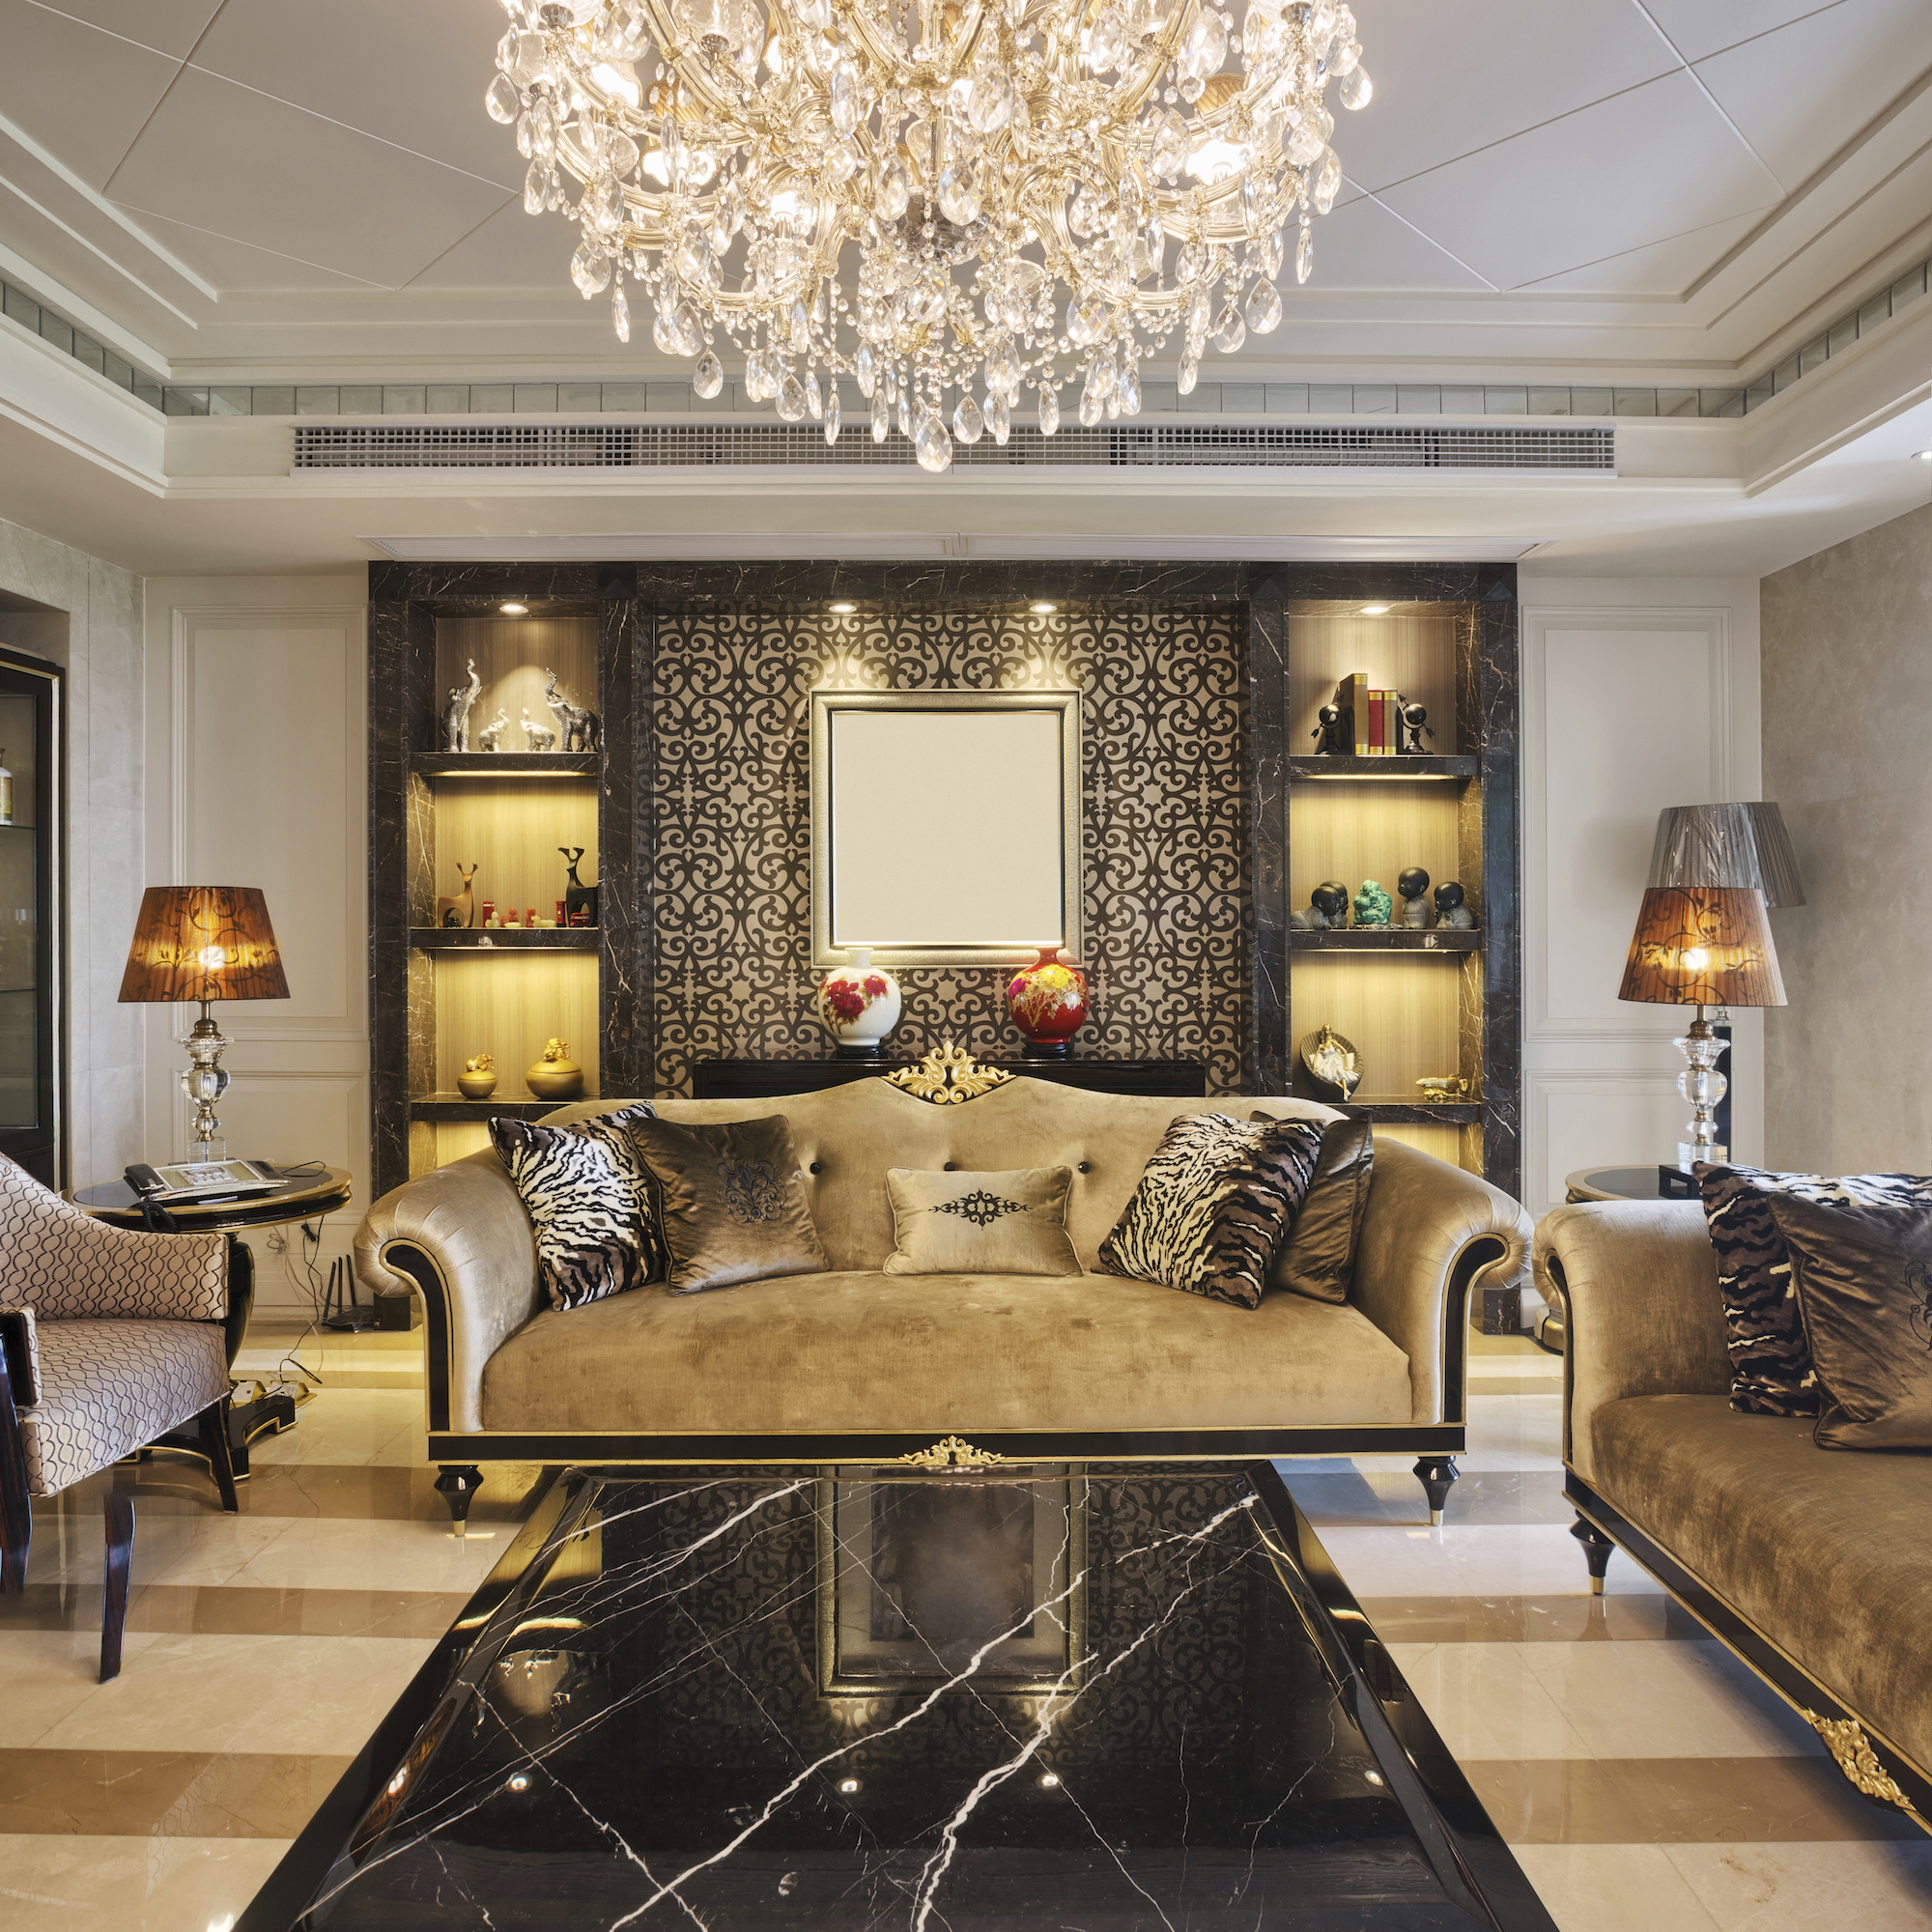 A luxury home sitting room with chandelier, brocade sofa and marble floors.